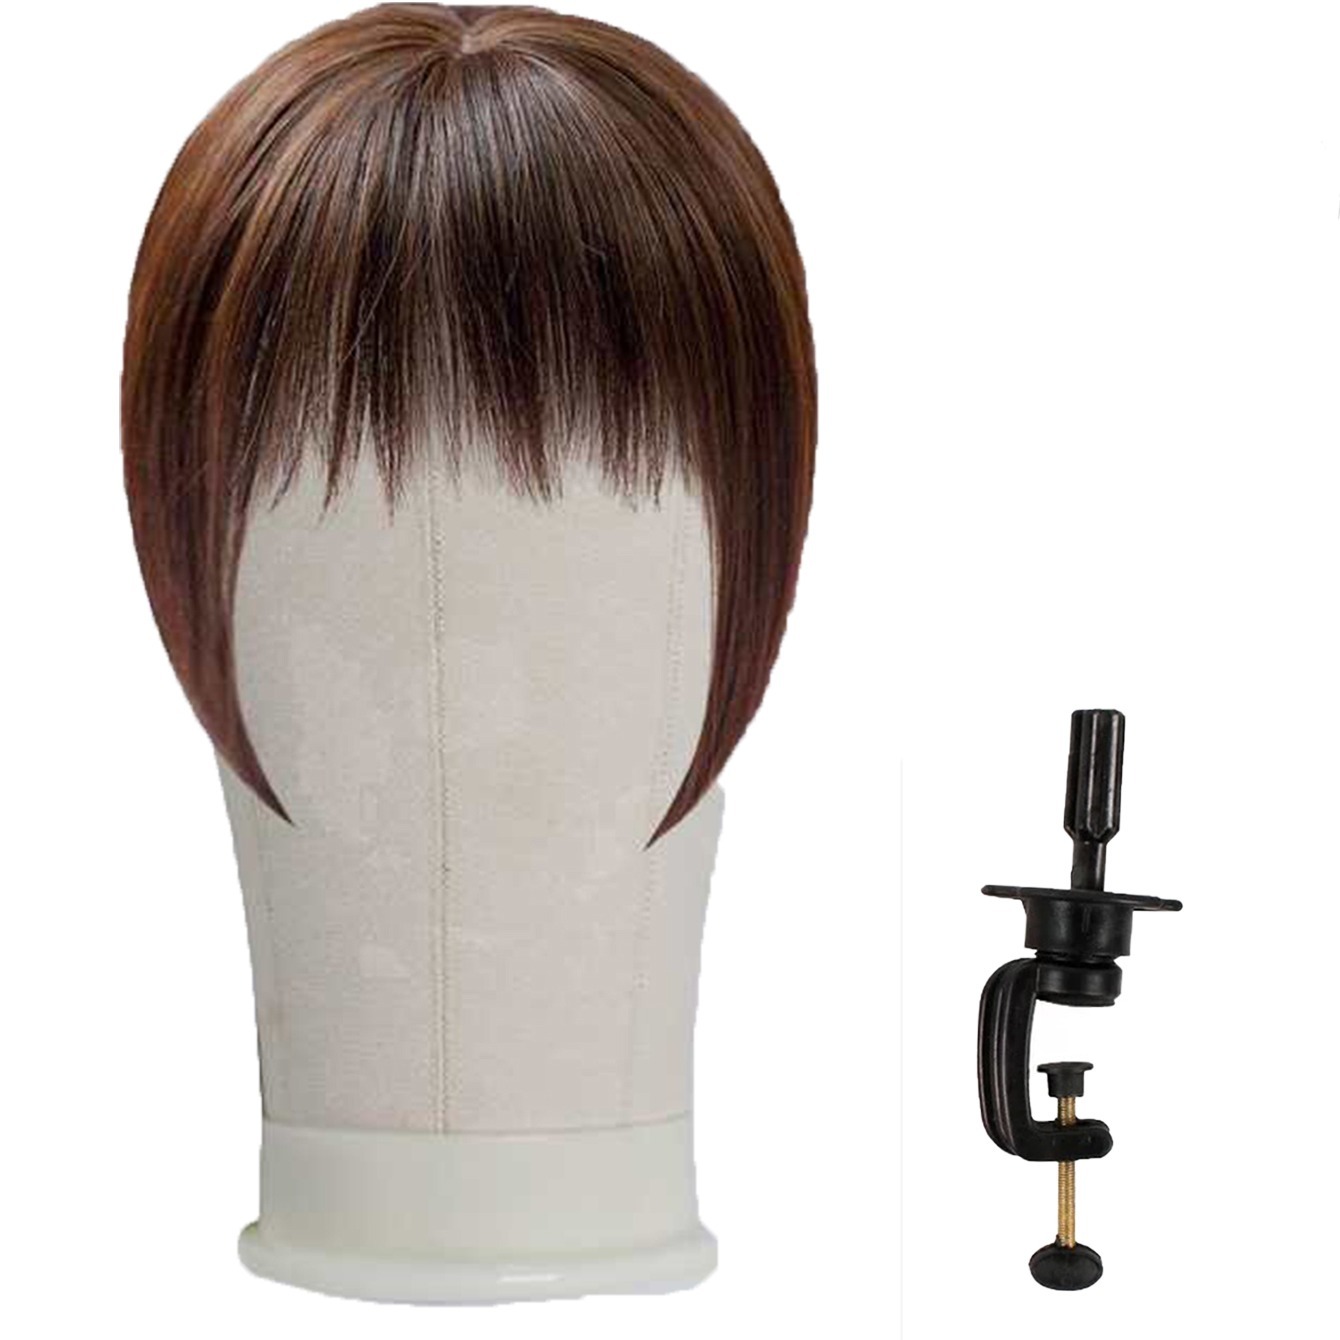 Mr head 23 Inch Wig Head Cork Canvas Mannequin Head with Stand for